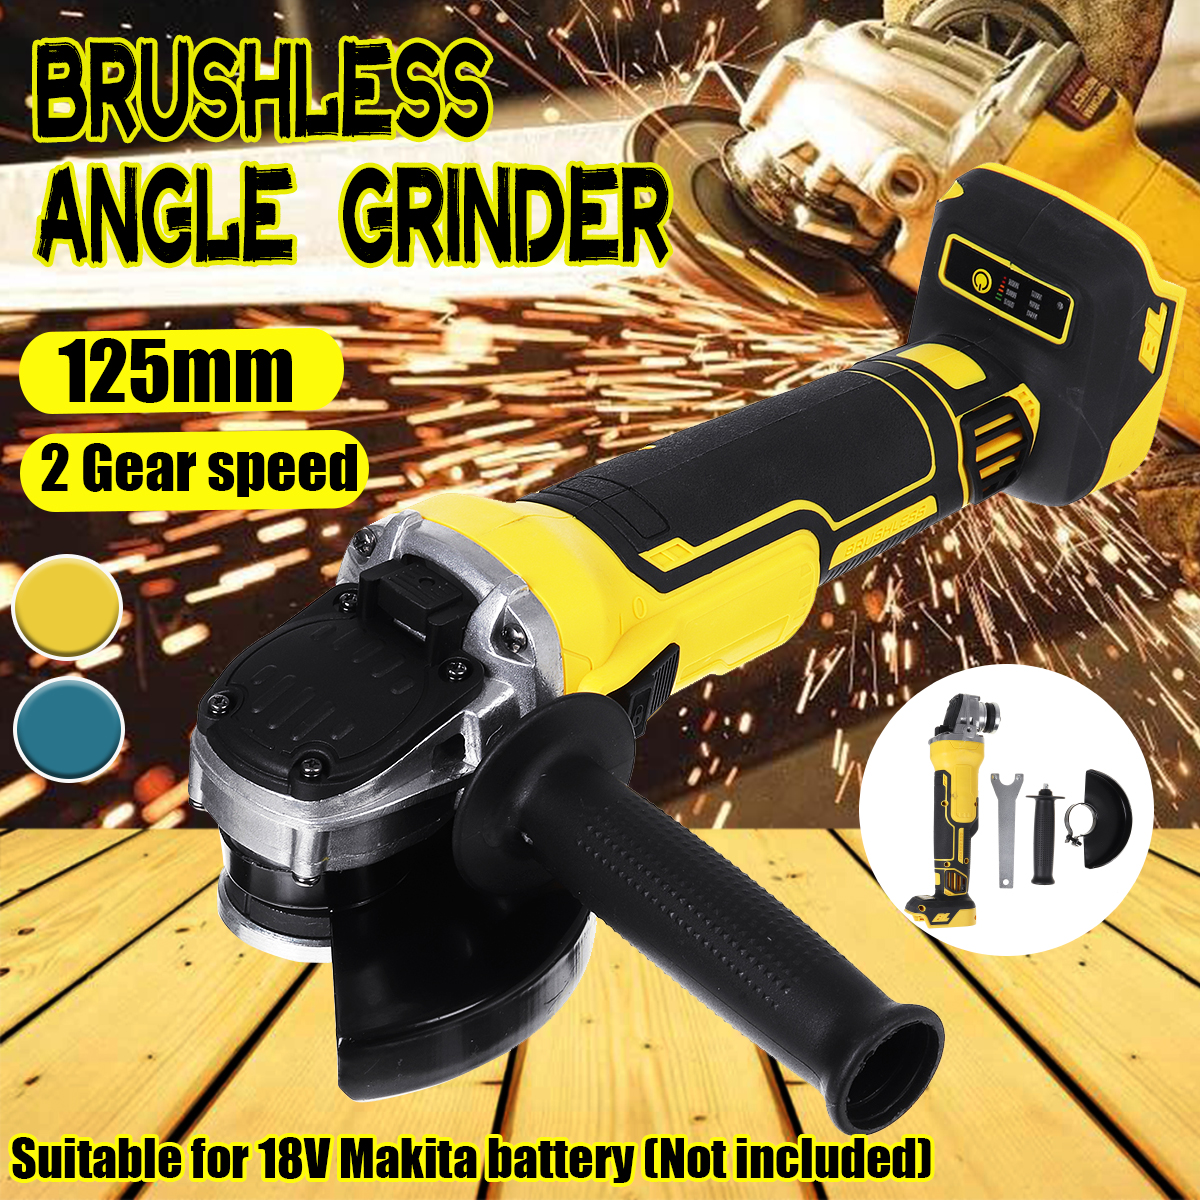 Drillpro-Electric-Brushless-Cordless-Angle-Grinder-M10-125mm-Cut-for-Makiita-18V-Battery-1791879-2